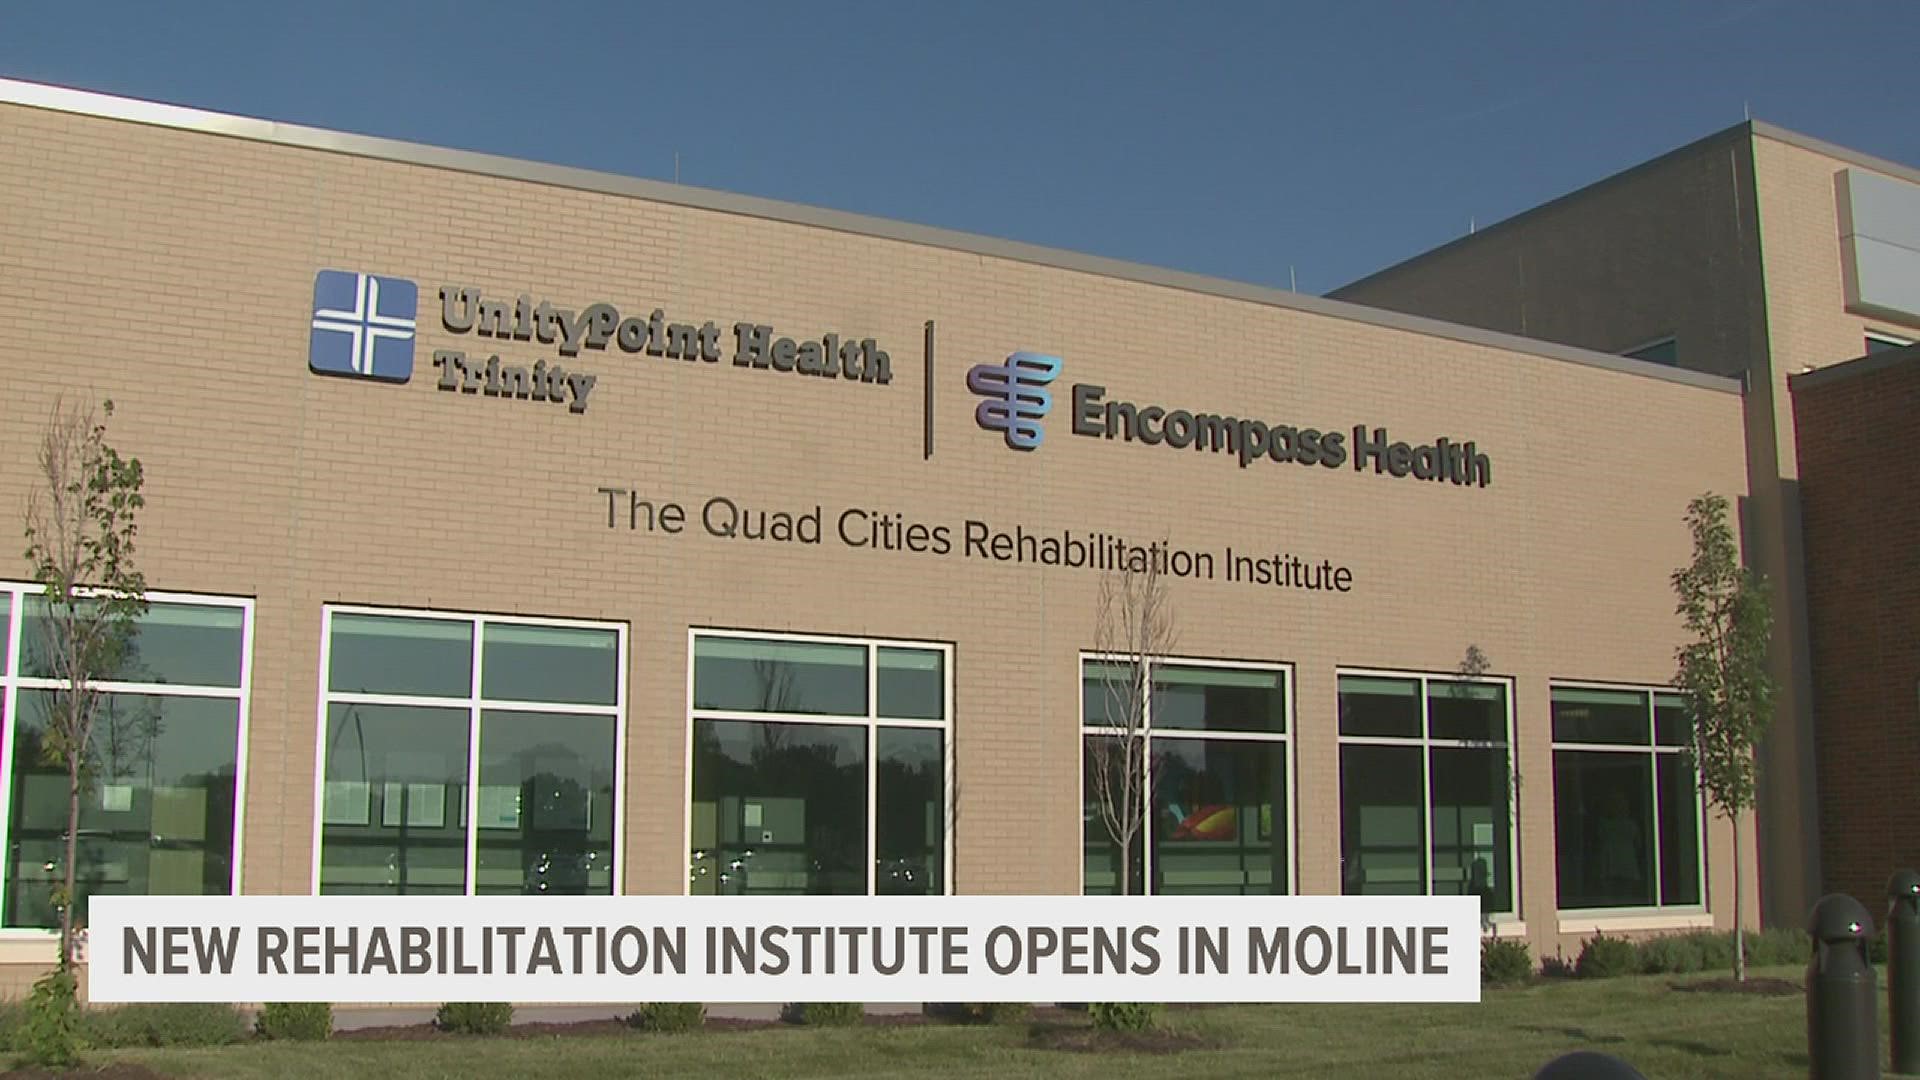 The medical groups cut the ribbon and opened the Quad Cities Rehabilitation Institute on Thursday, bringing a new, state-of-the-art physical therapy center to the QC